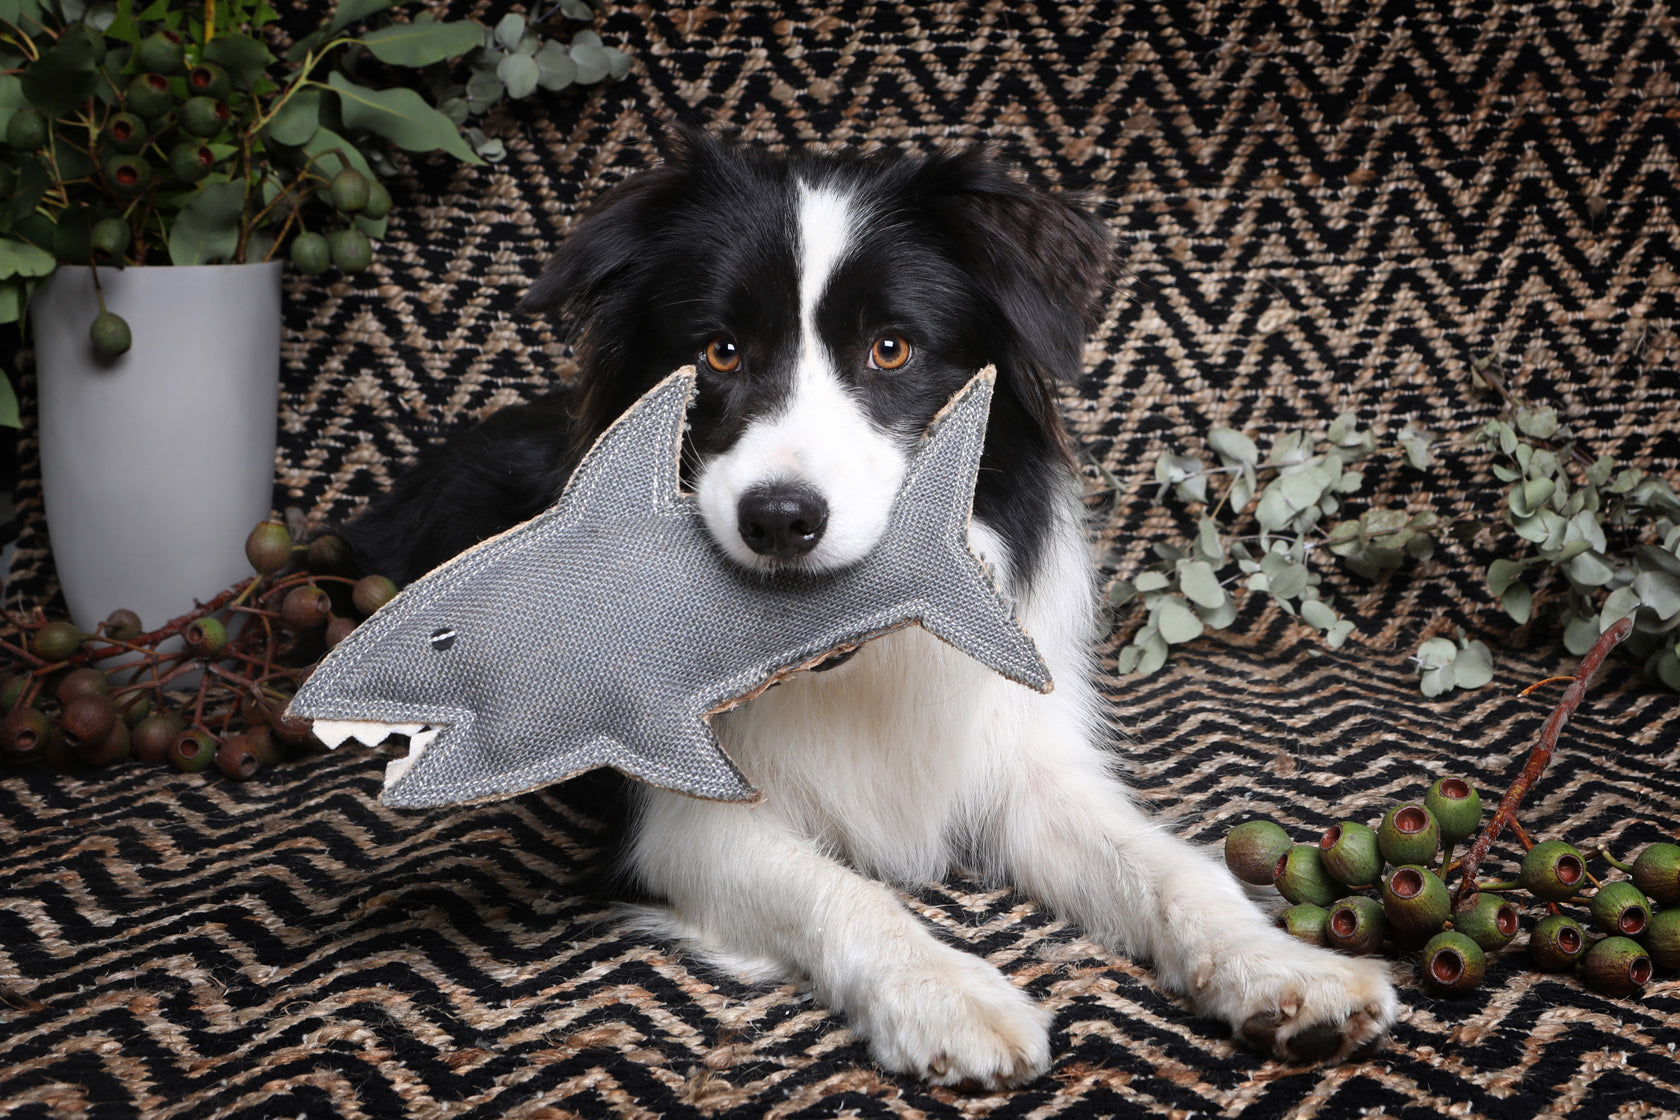 Border collie with brown eyes holding eco friendly dog toy Shazza the shark dog toy by outbackt ails in its teeth. They are surrounded by native Australian plants.